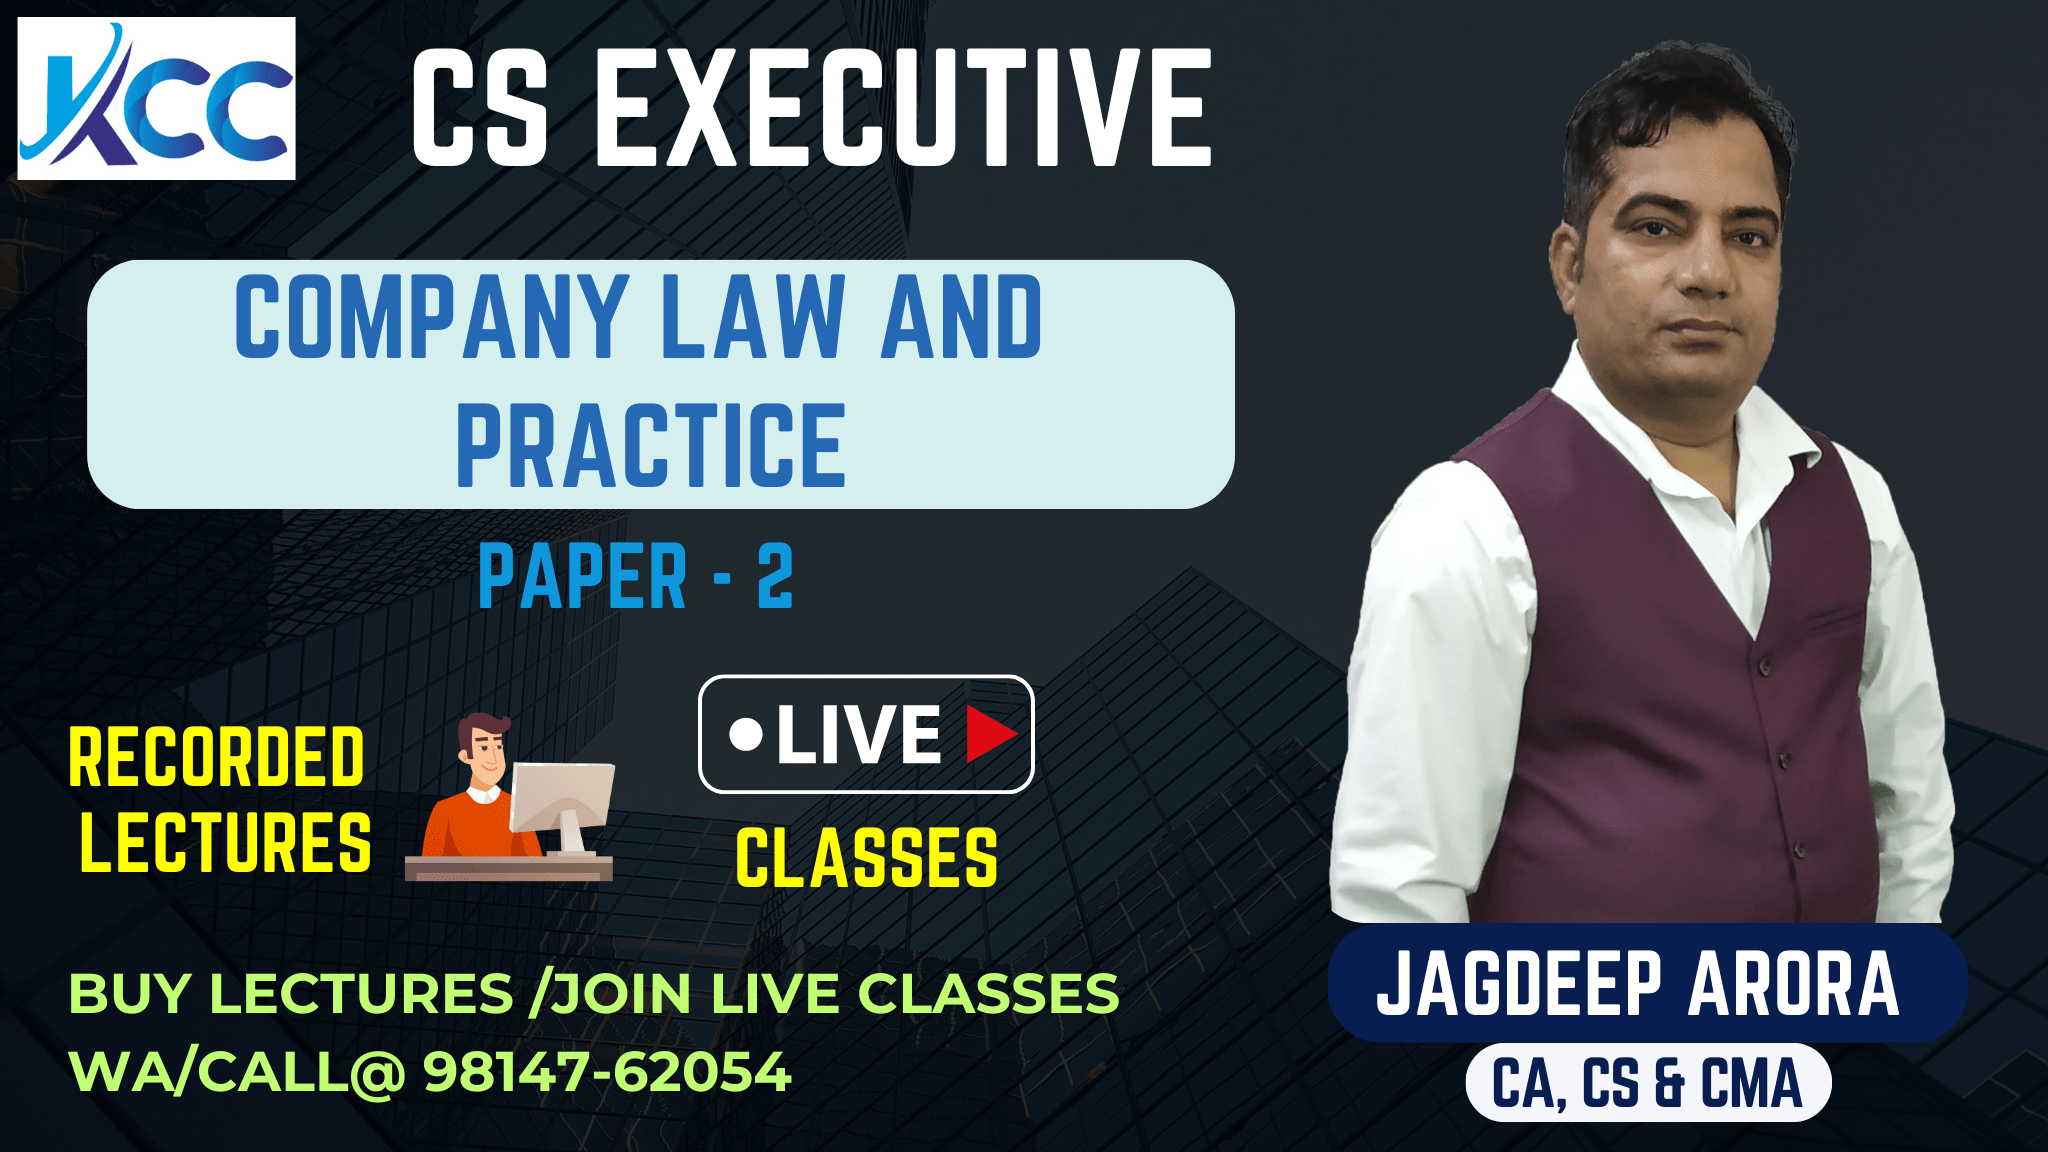 Best CS Executive Company Law and Practice Video Lectures and Live Online Classes by jagdeep Arora sir at KCC Tutorials